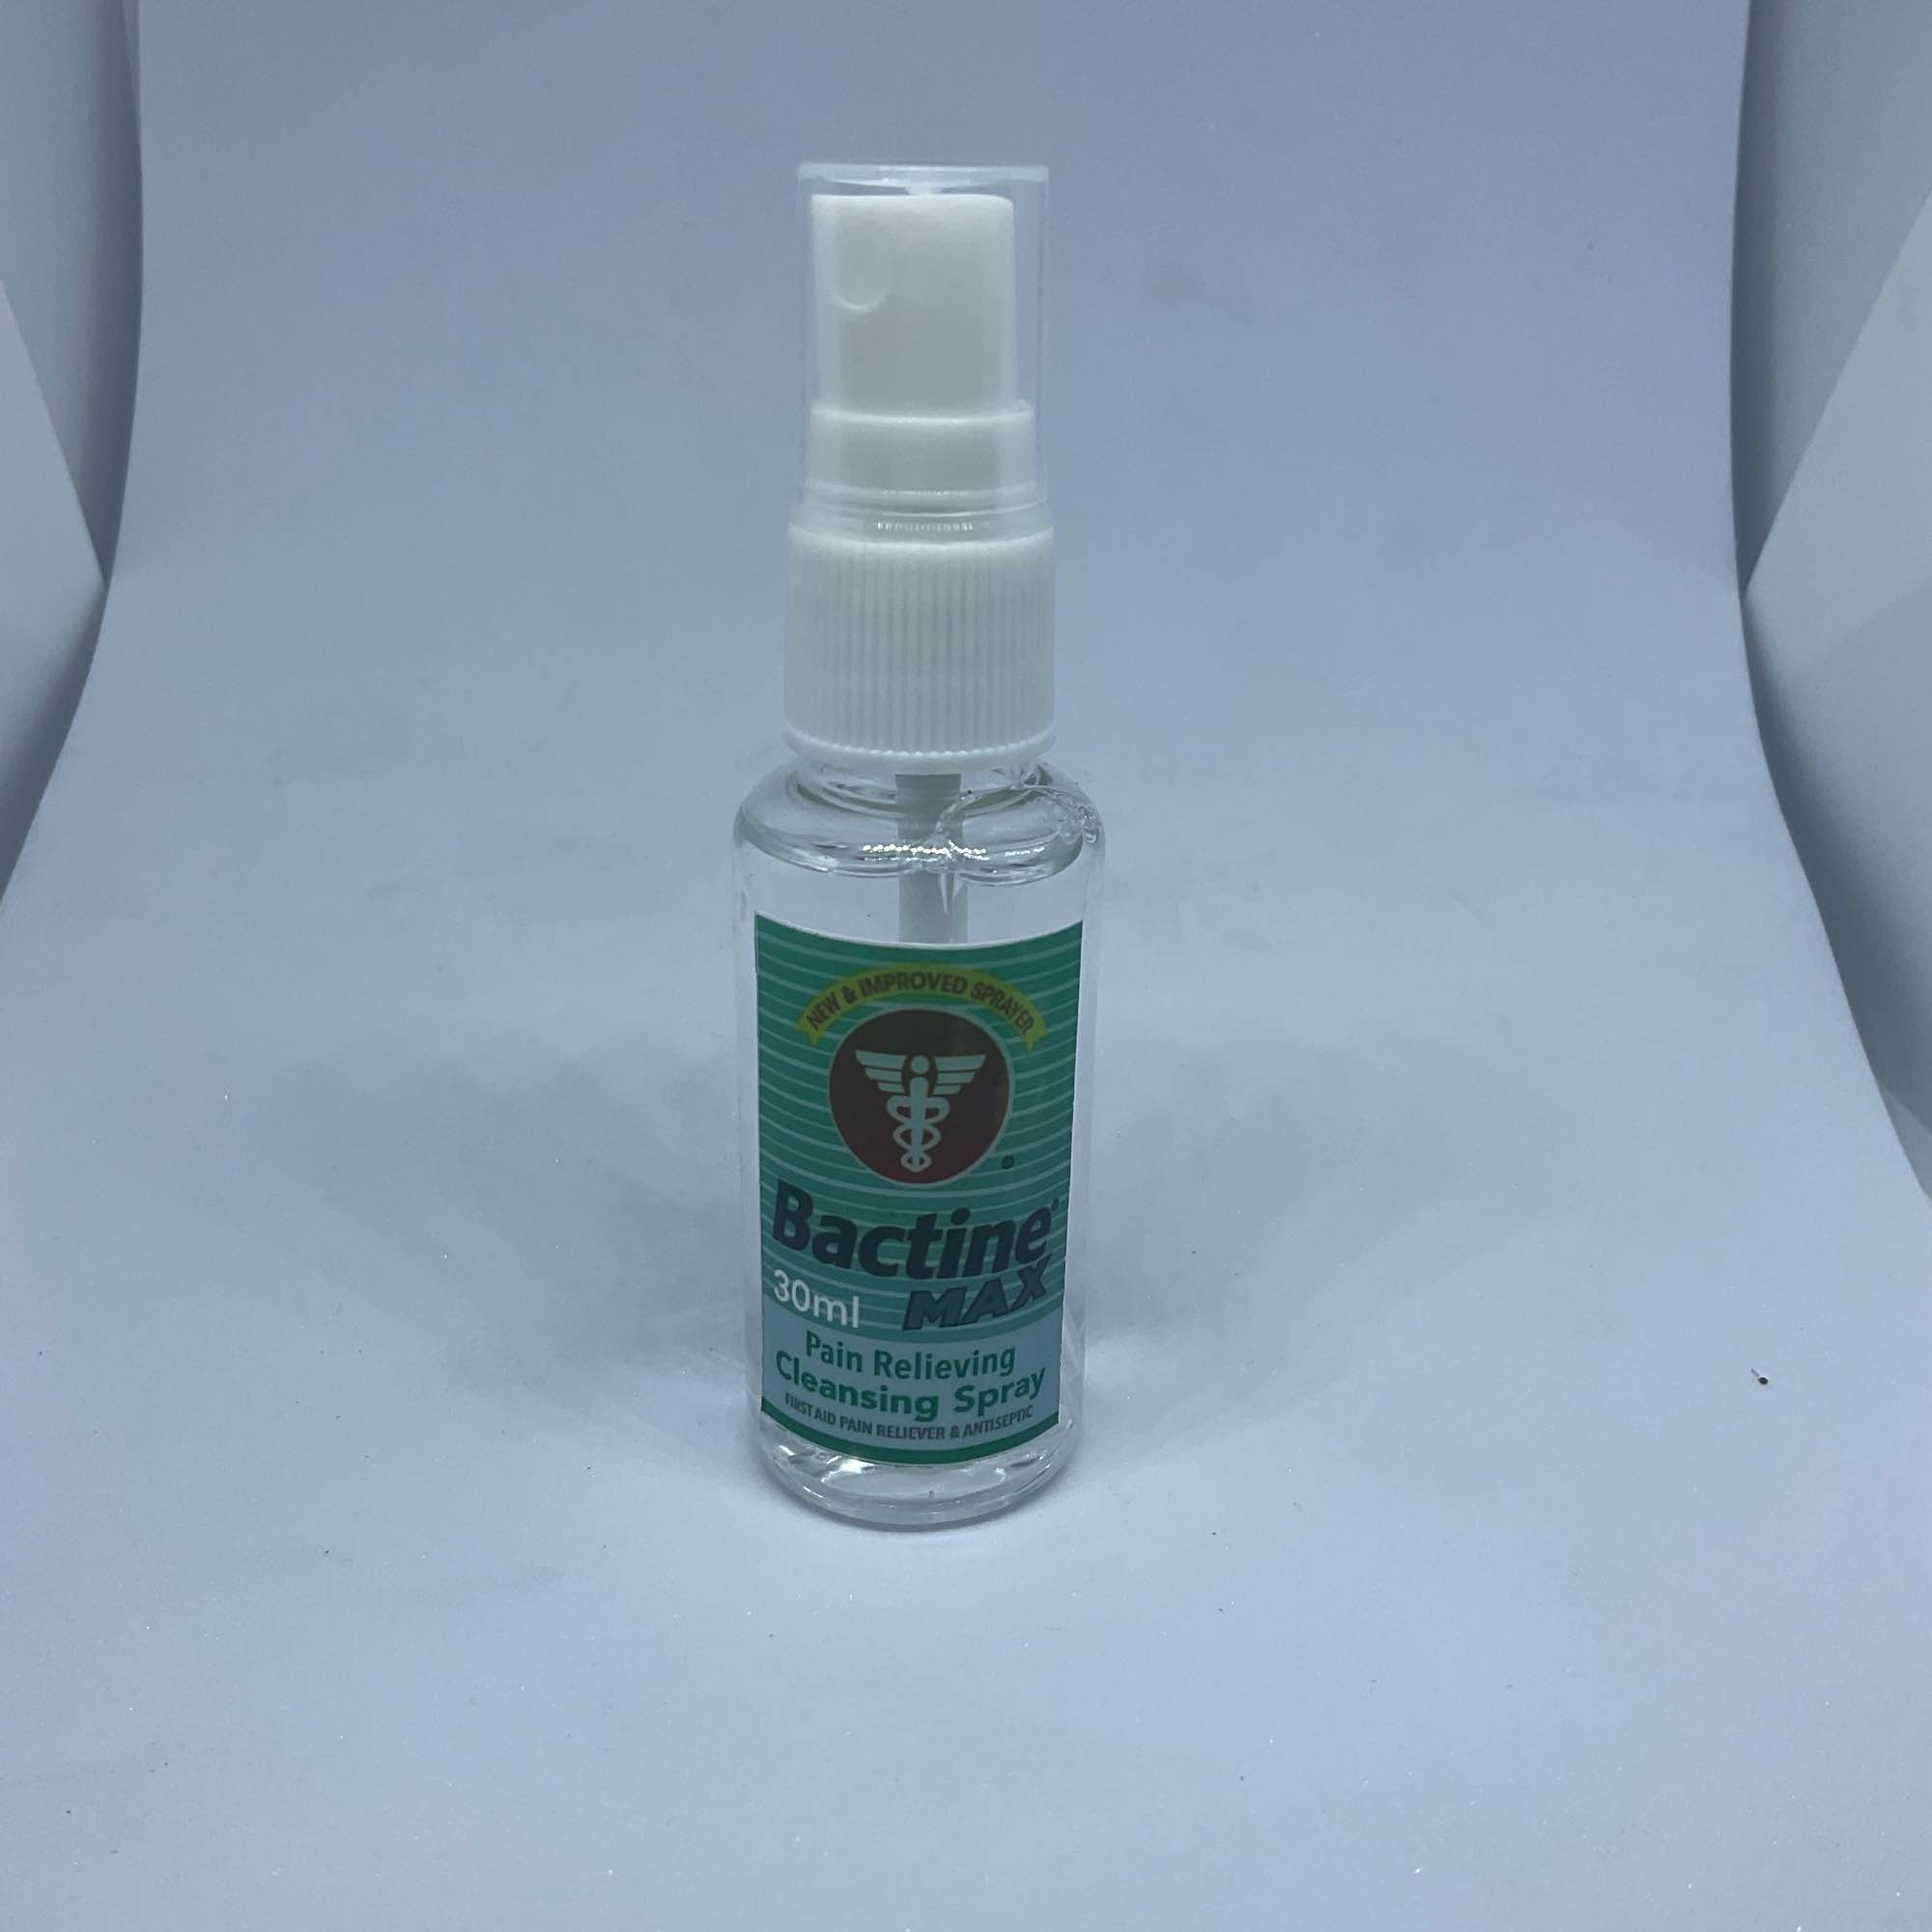 BACTINE MAX Pain Relieving Cleansing spray and liquid